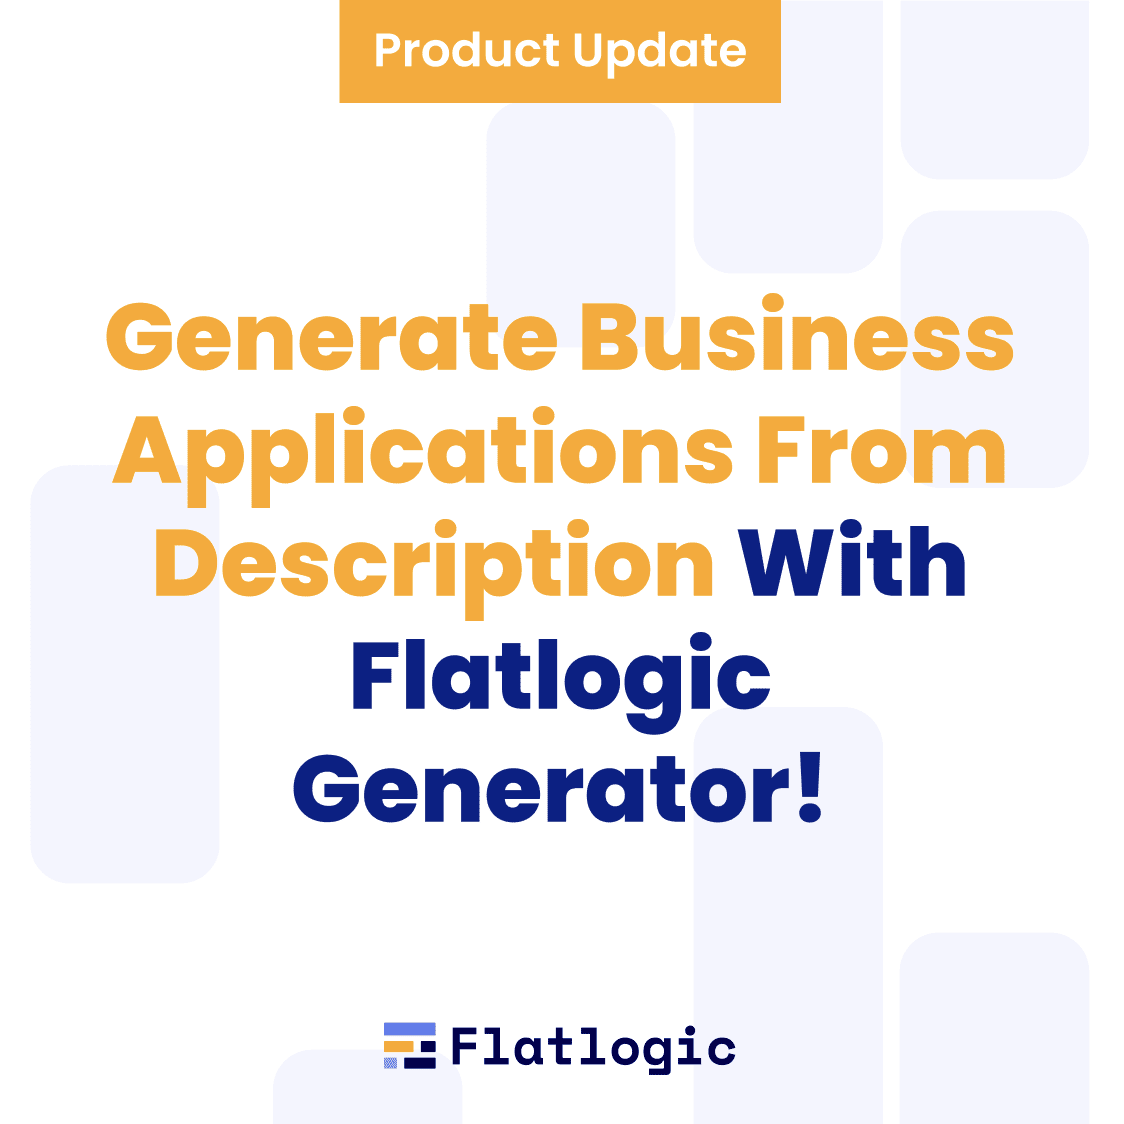 Generate Business Applications From Description With Flatlogic Generator!